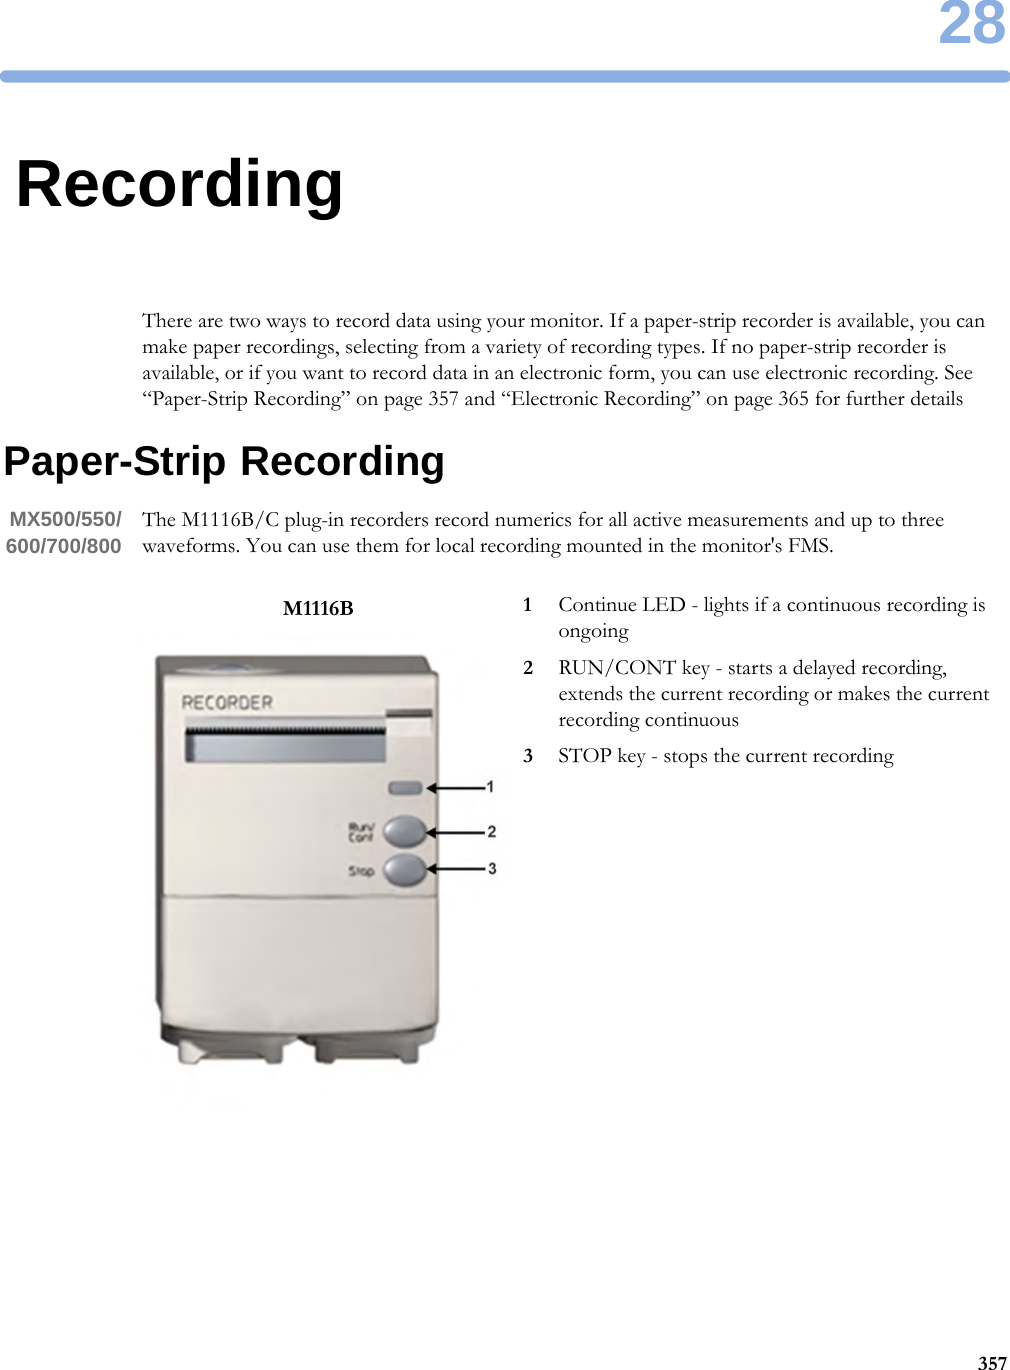 2835728RecordingThere are two ways to record data using your monitor. If a paper-strip recorder is available, you can make paper recordings, selecting from a variety of recording types. If no paper-strip recorder is available, or if you want to record data in an electronic form, you can use electronic recording. See “Paper-Strip Recording” on page 357 and “Electronic Recording” on page 365 for further detailsPaper-Strip RecordingMX500/550/600/700/800 The M1116B/C plug-in recorders record numerics for all active measurements and up to three waveforms. You can use them for local recording mounted in the monitor&apos;s FMS.M1116B 1Continue LED - lights if a continuous recording is ongoing2RUN/CONT key - starts a delayed recording, extends the current recording or makes the current recording continuous3STOP key - stops the current recording